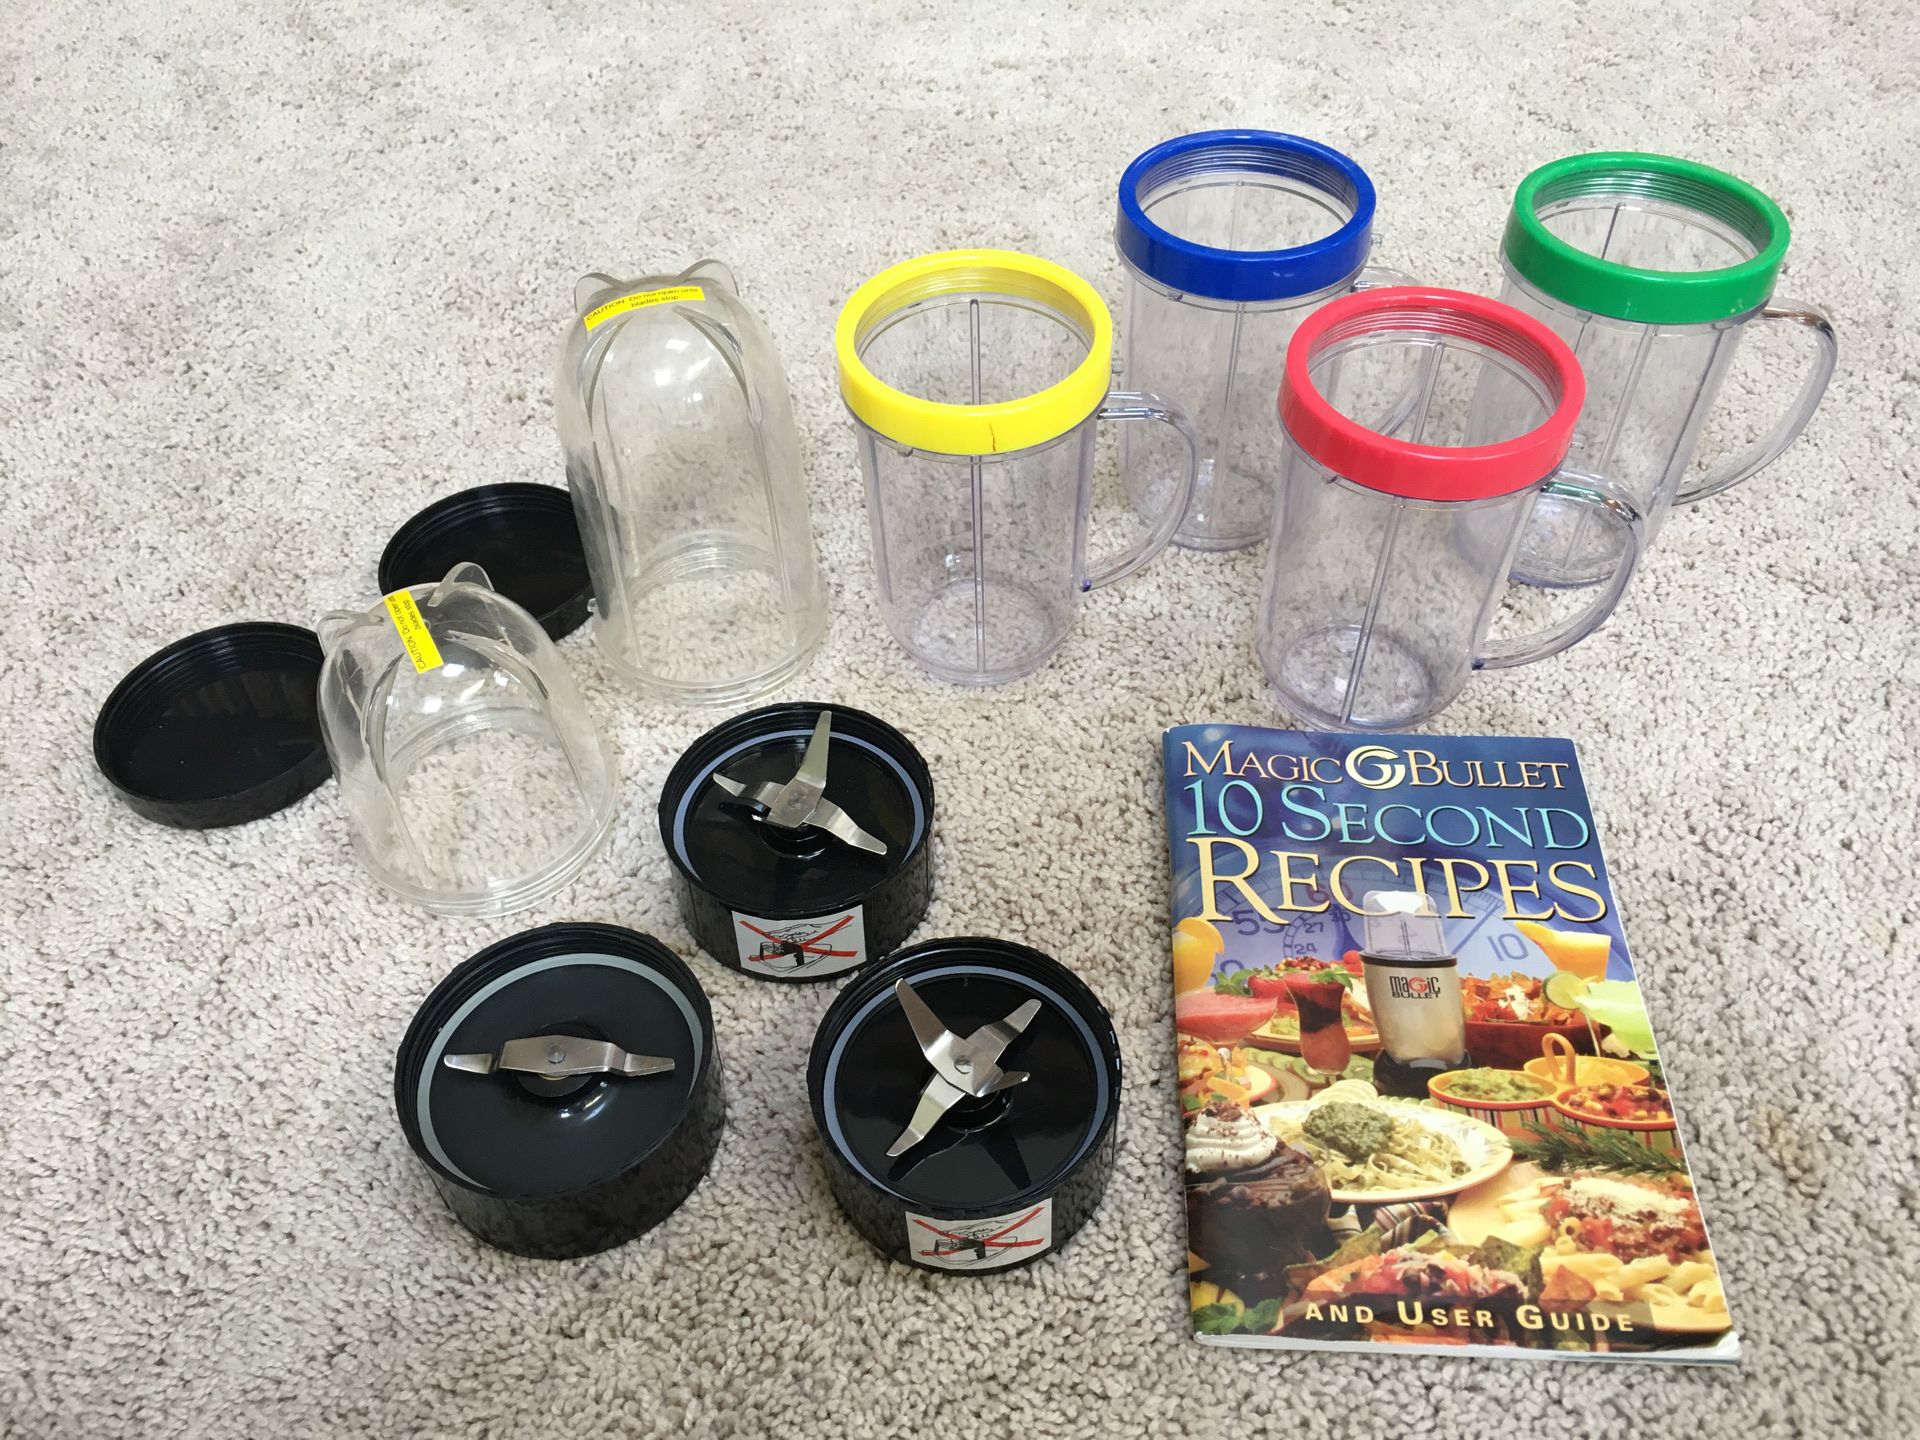 Magic Bullet 250W Replacement Blades and Party Mug Set - Willing to separate